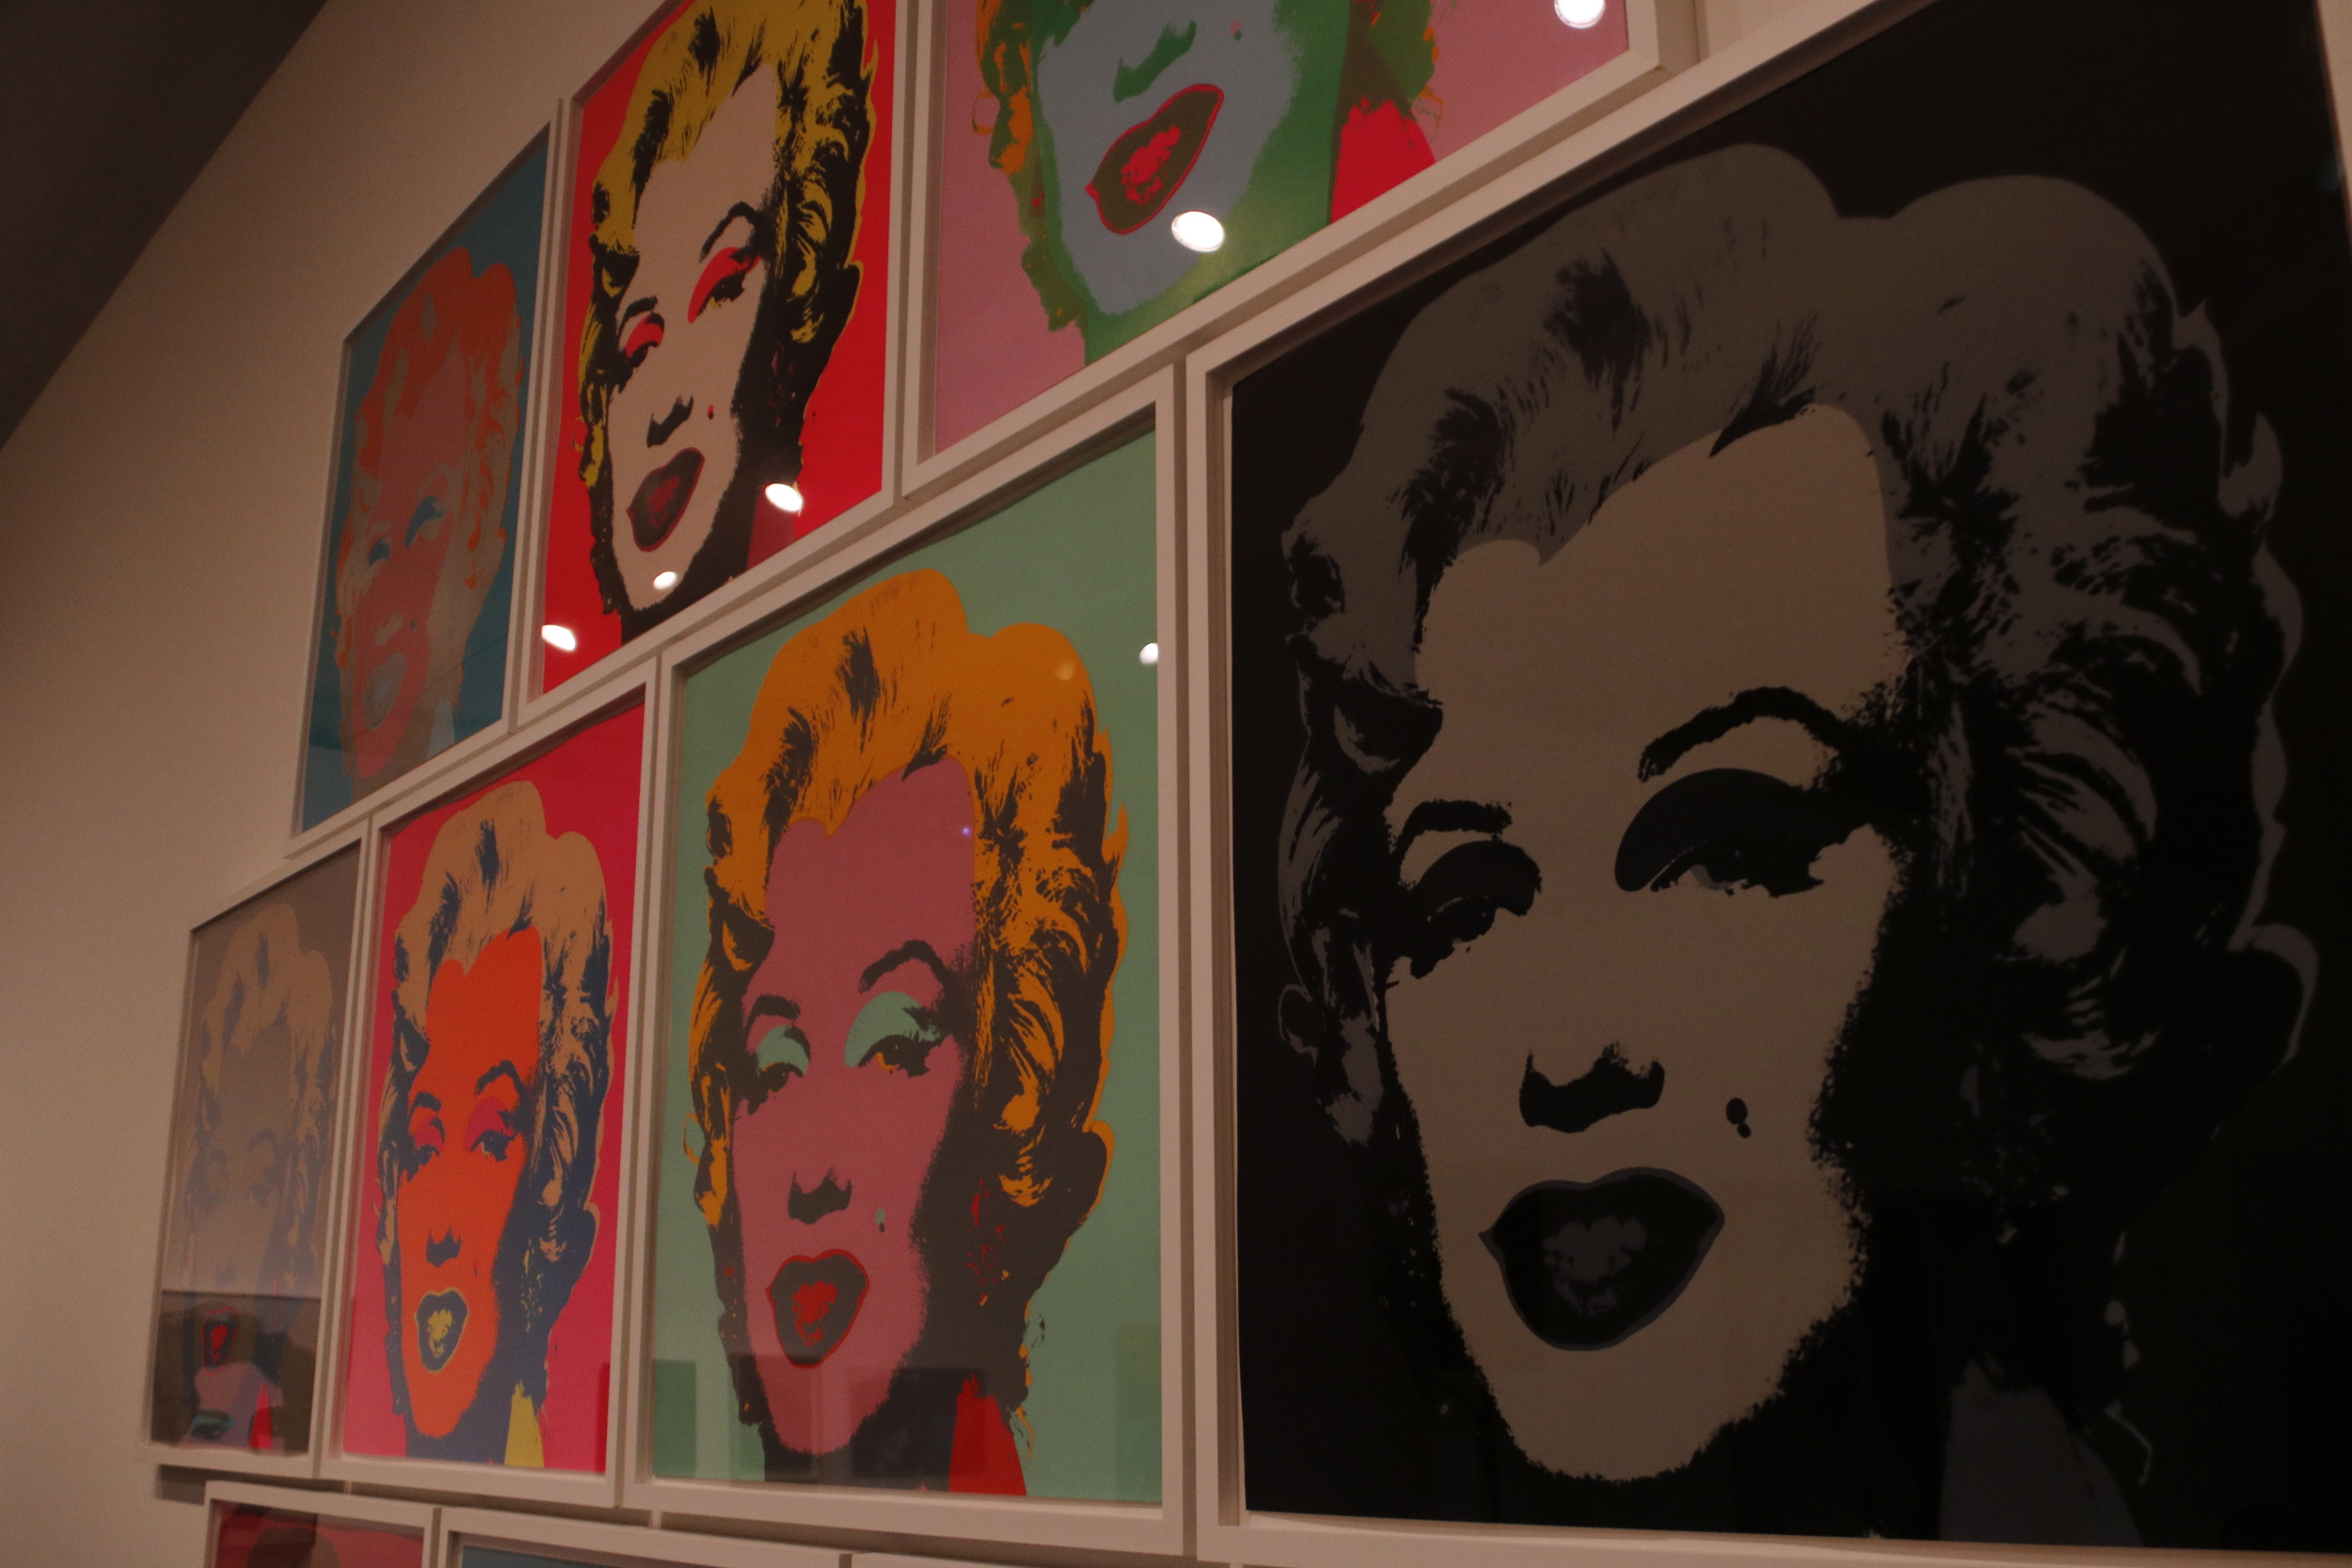 The iconic Marylin Monroe Warhol portraits in the 'Andy Warhol. The Mechanical Art' exhibition on display at the CaixaForum space (by ACN)